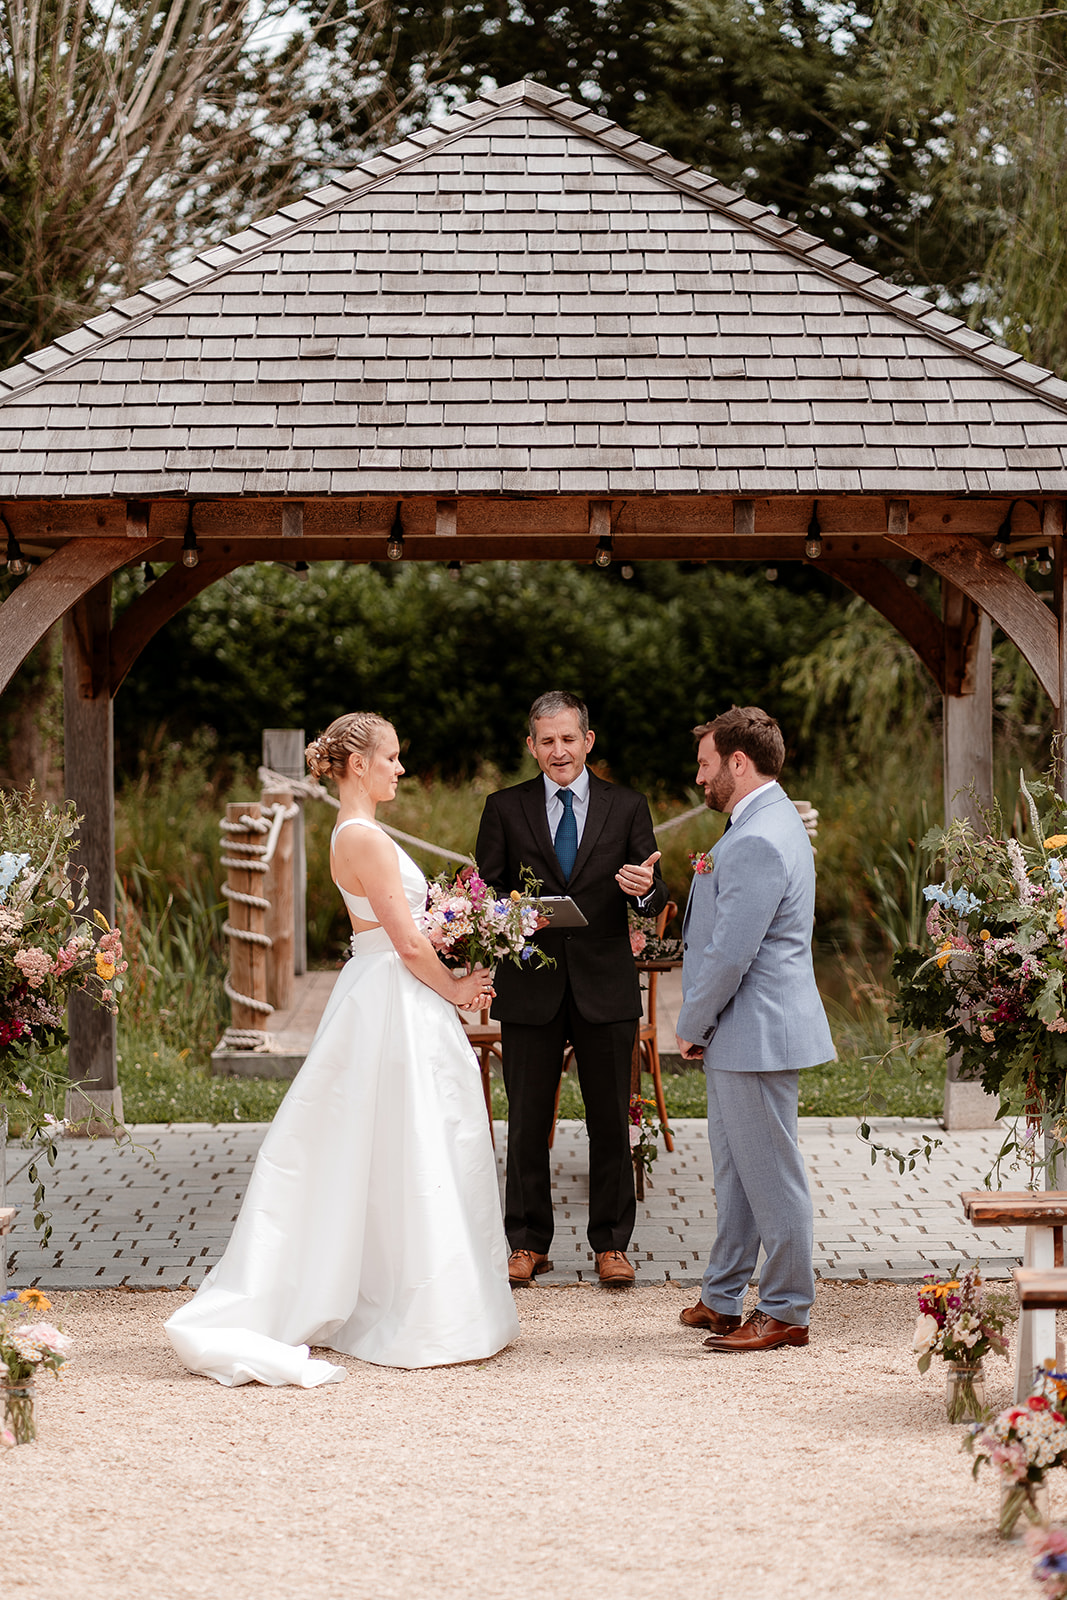 Bride and groom stand together at their outdoor ceremony at a summer wedding at Silchester Farm